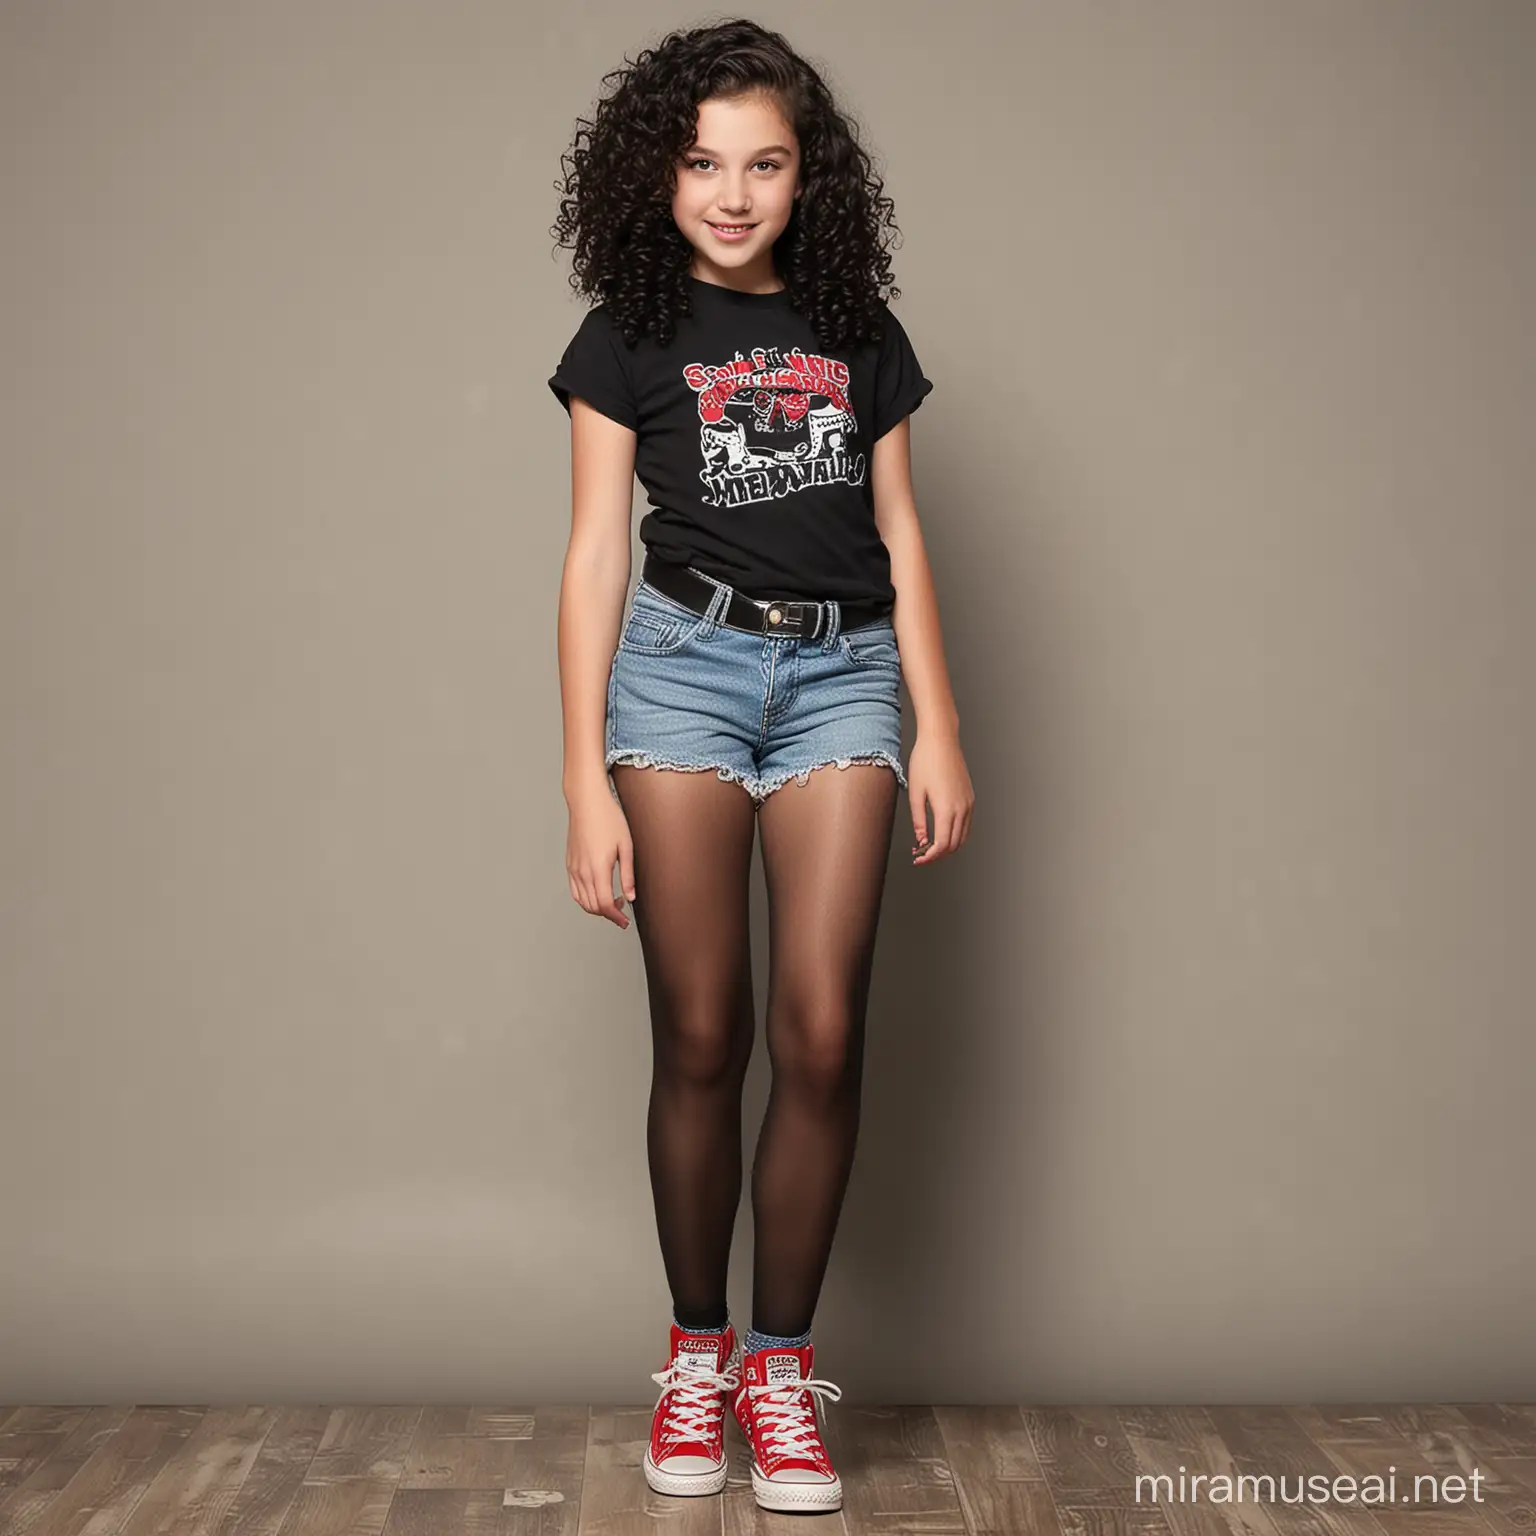 12 year old white girl, black curly hair,  wearing black pantyhose, jean shorts, red converse shoes, 